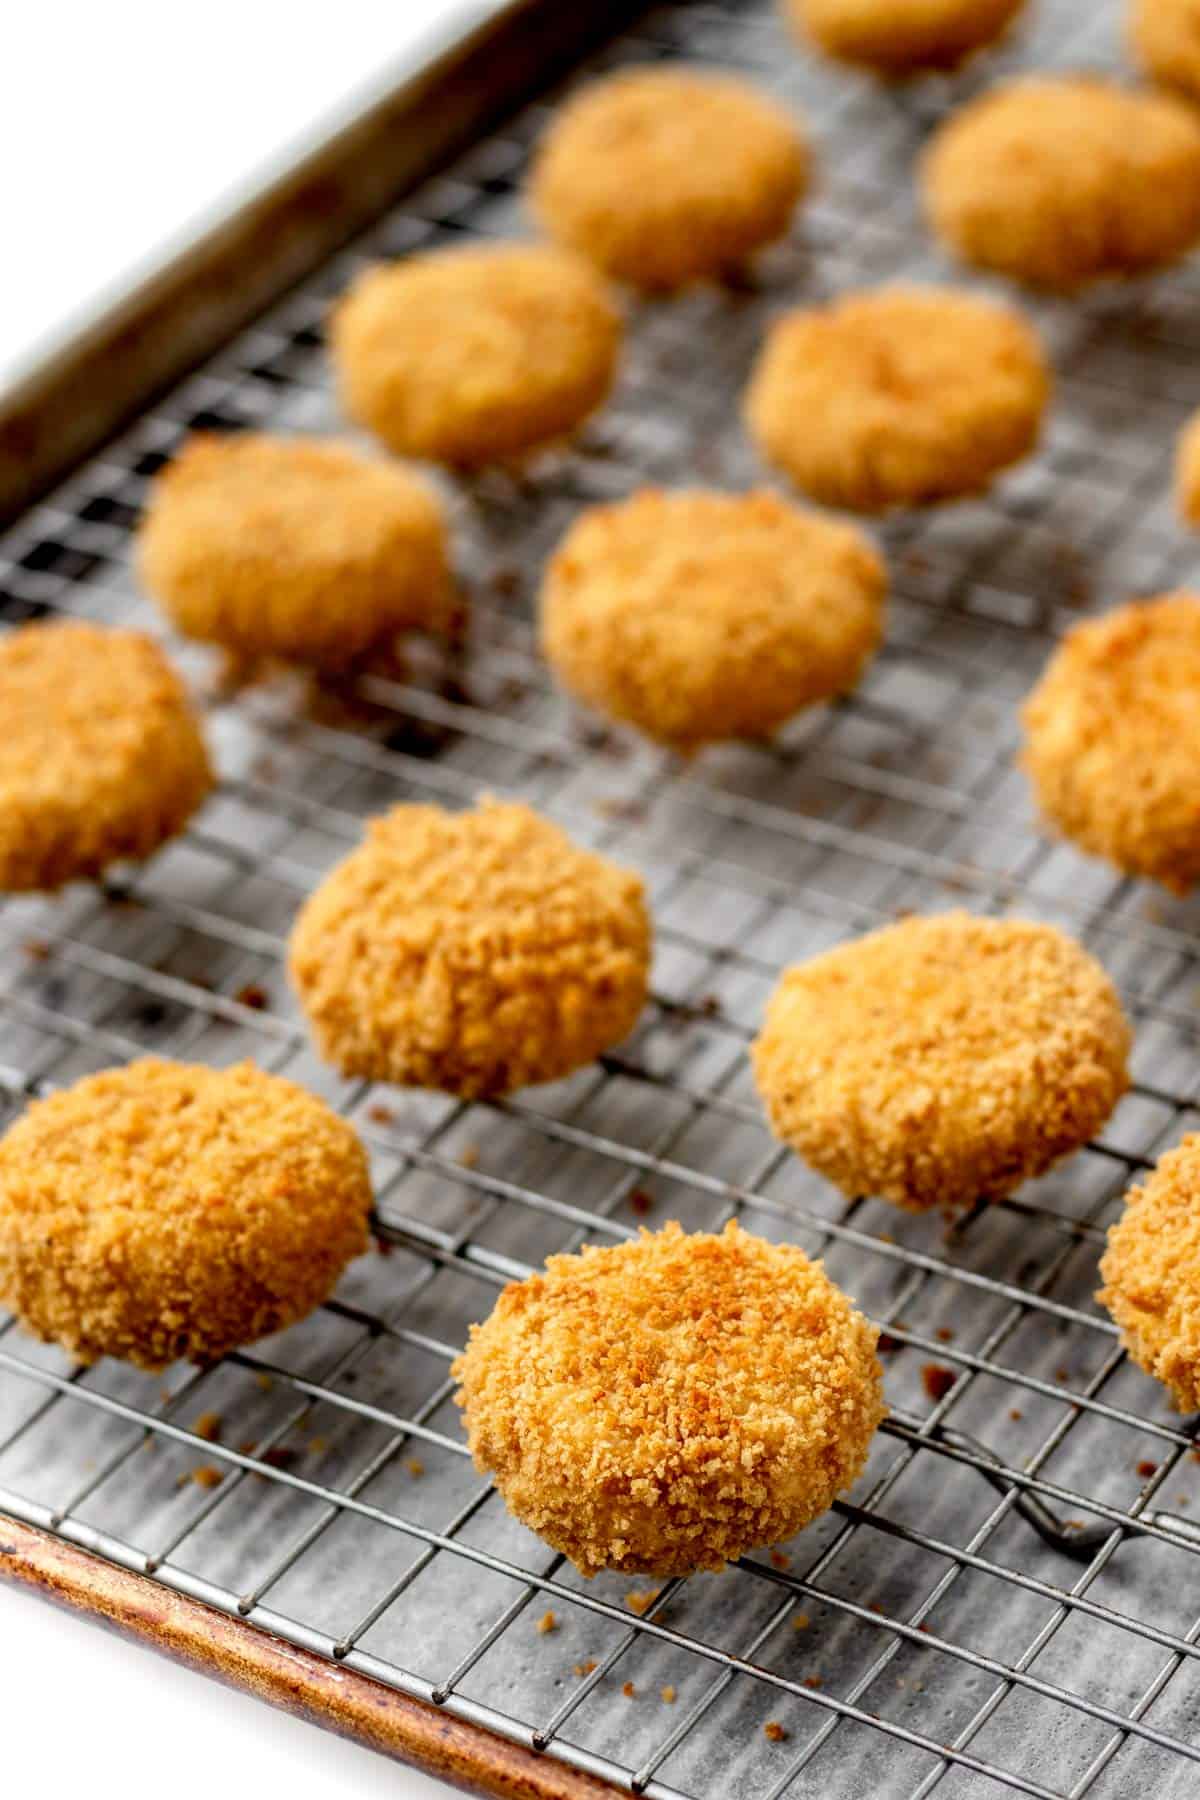 Baked cauliflower nuggets out of the oven.